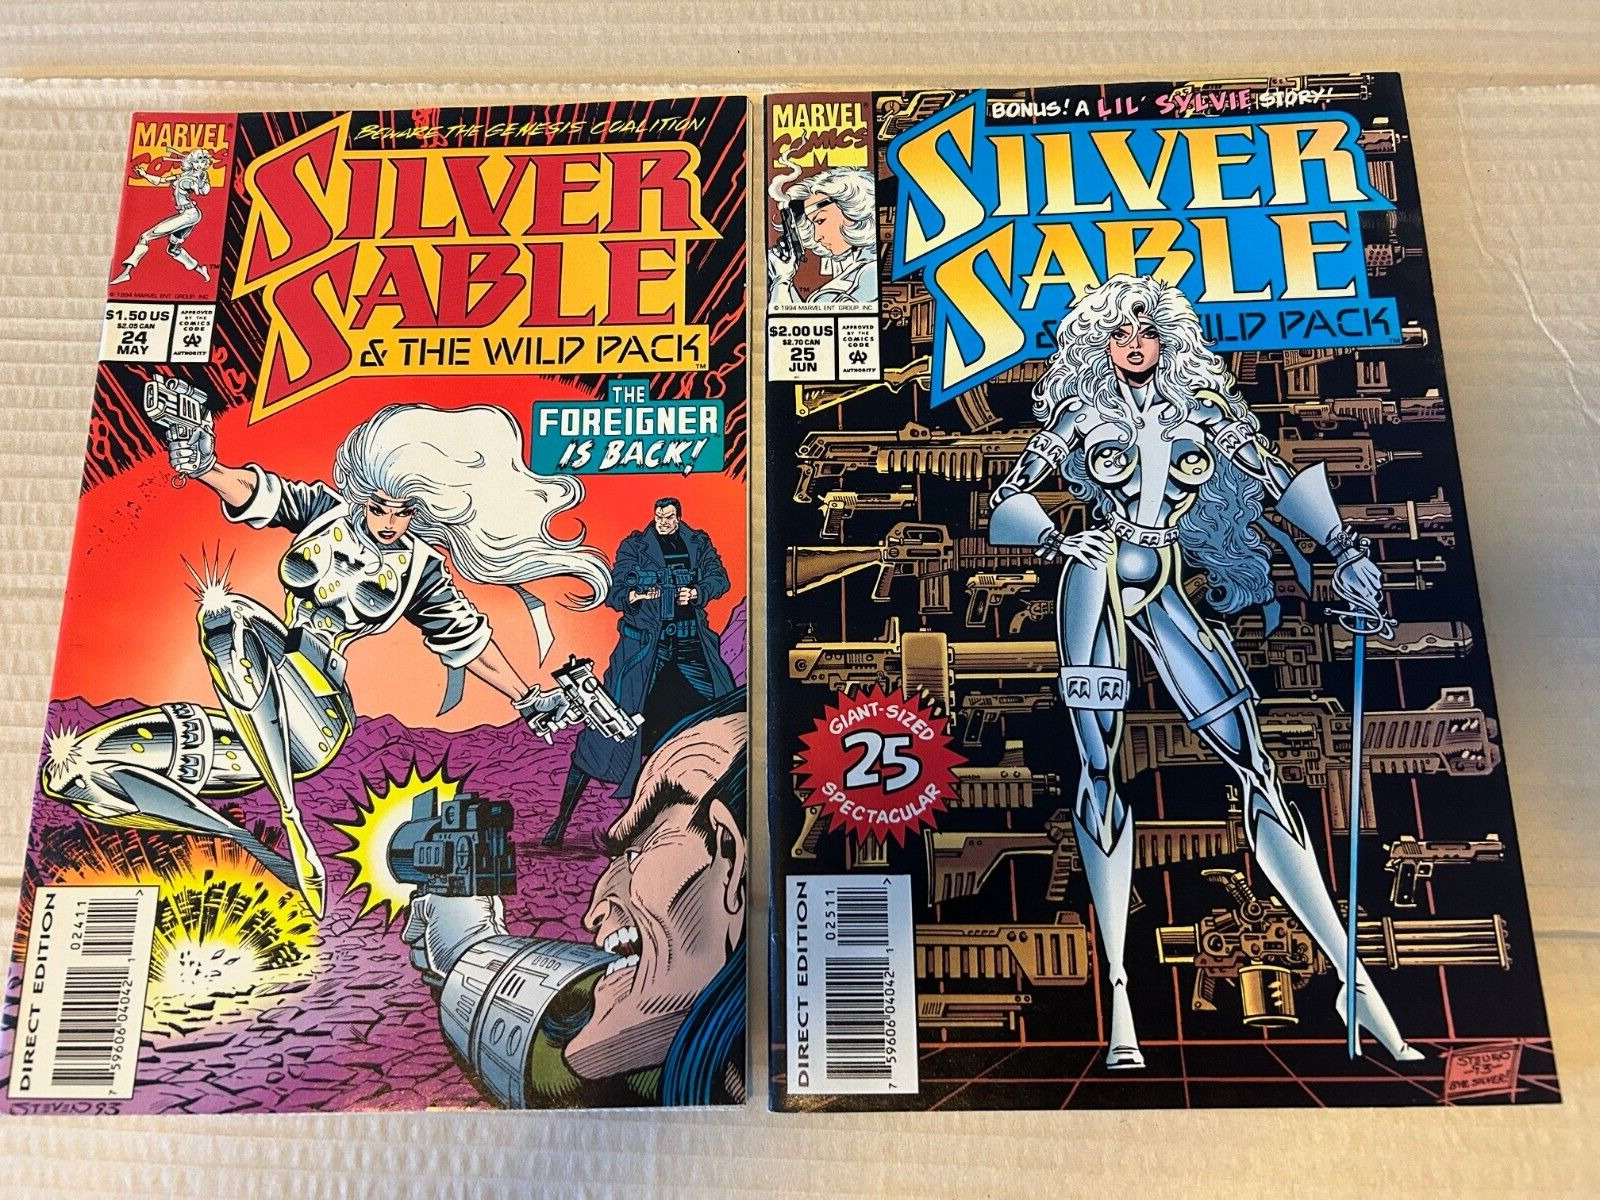 Silver Sable & Wild Pack (1994) Comic Lot Issues #24-25 F-VF Marvel